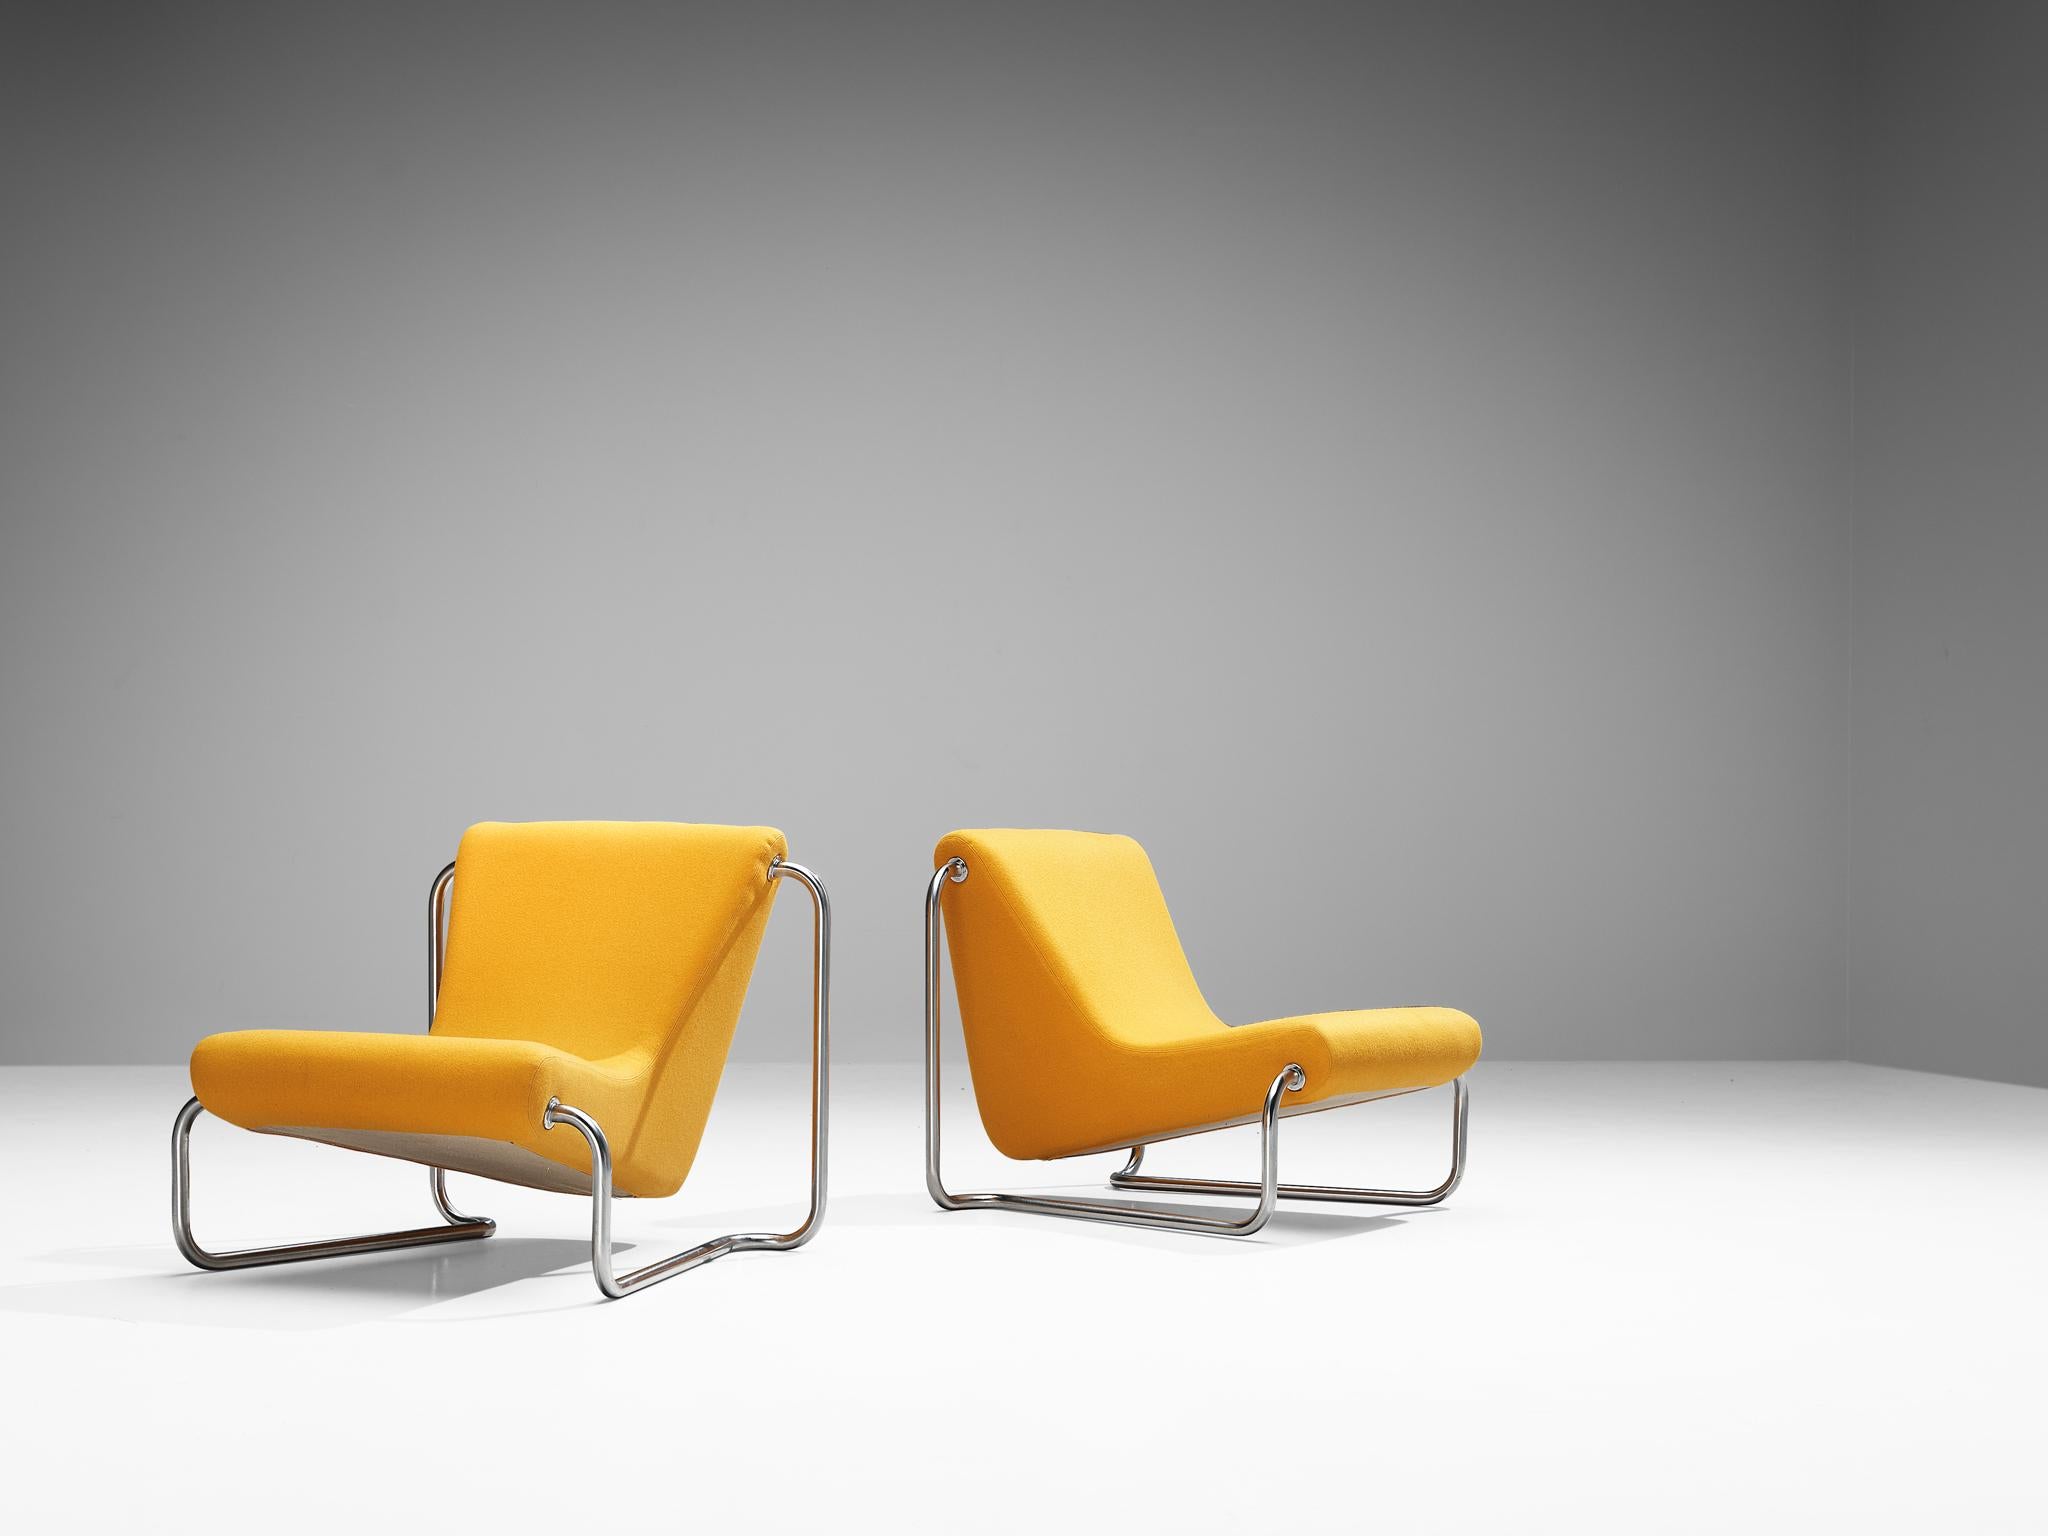 Luigi Colani for Fritz Hansen, pair of easy chairs, chrome-plated steel, orange fabric, Denmark, 1970s

The German industrial designer Luigi Colani was renowned for incorporating organic shapes inspired by nature into cutting-edge creations such